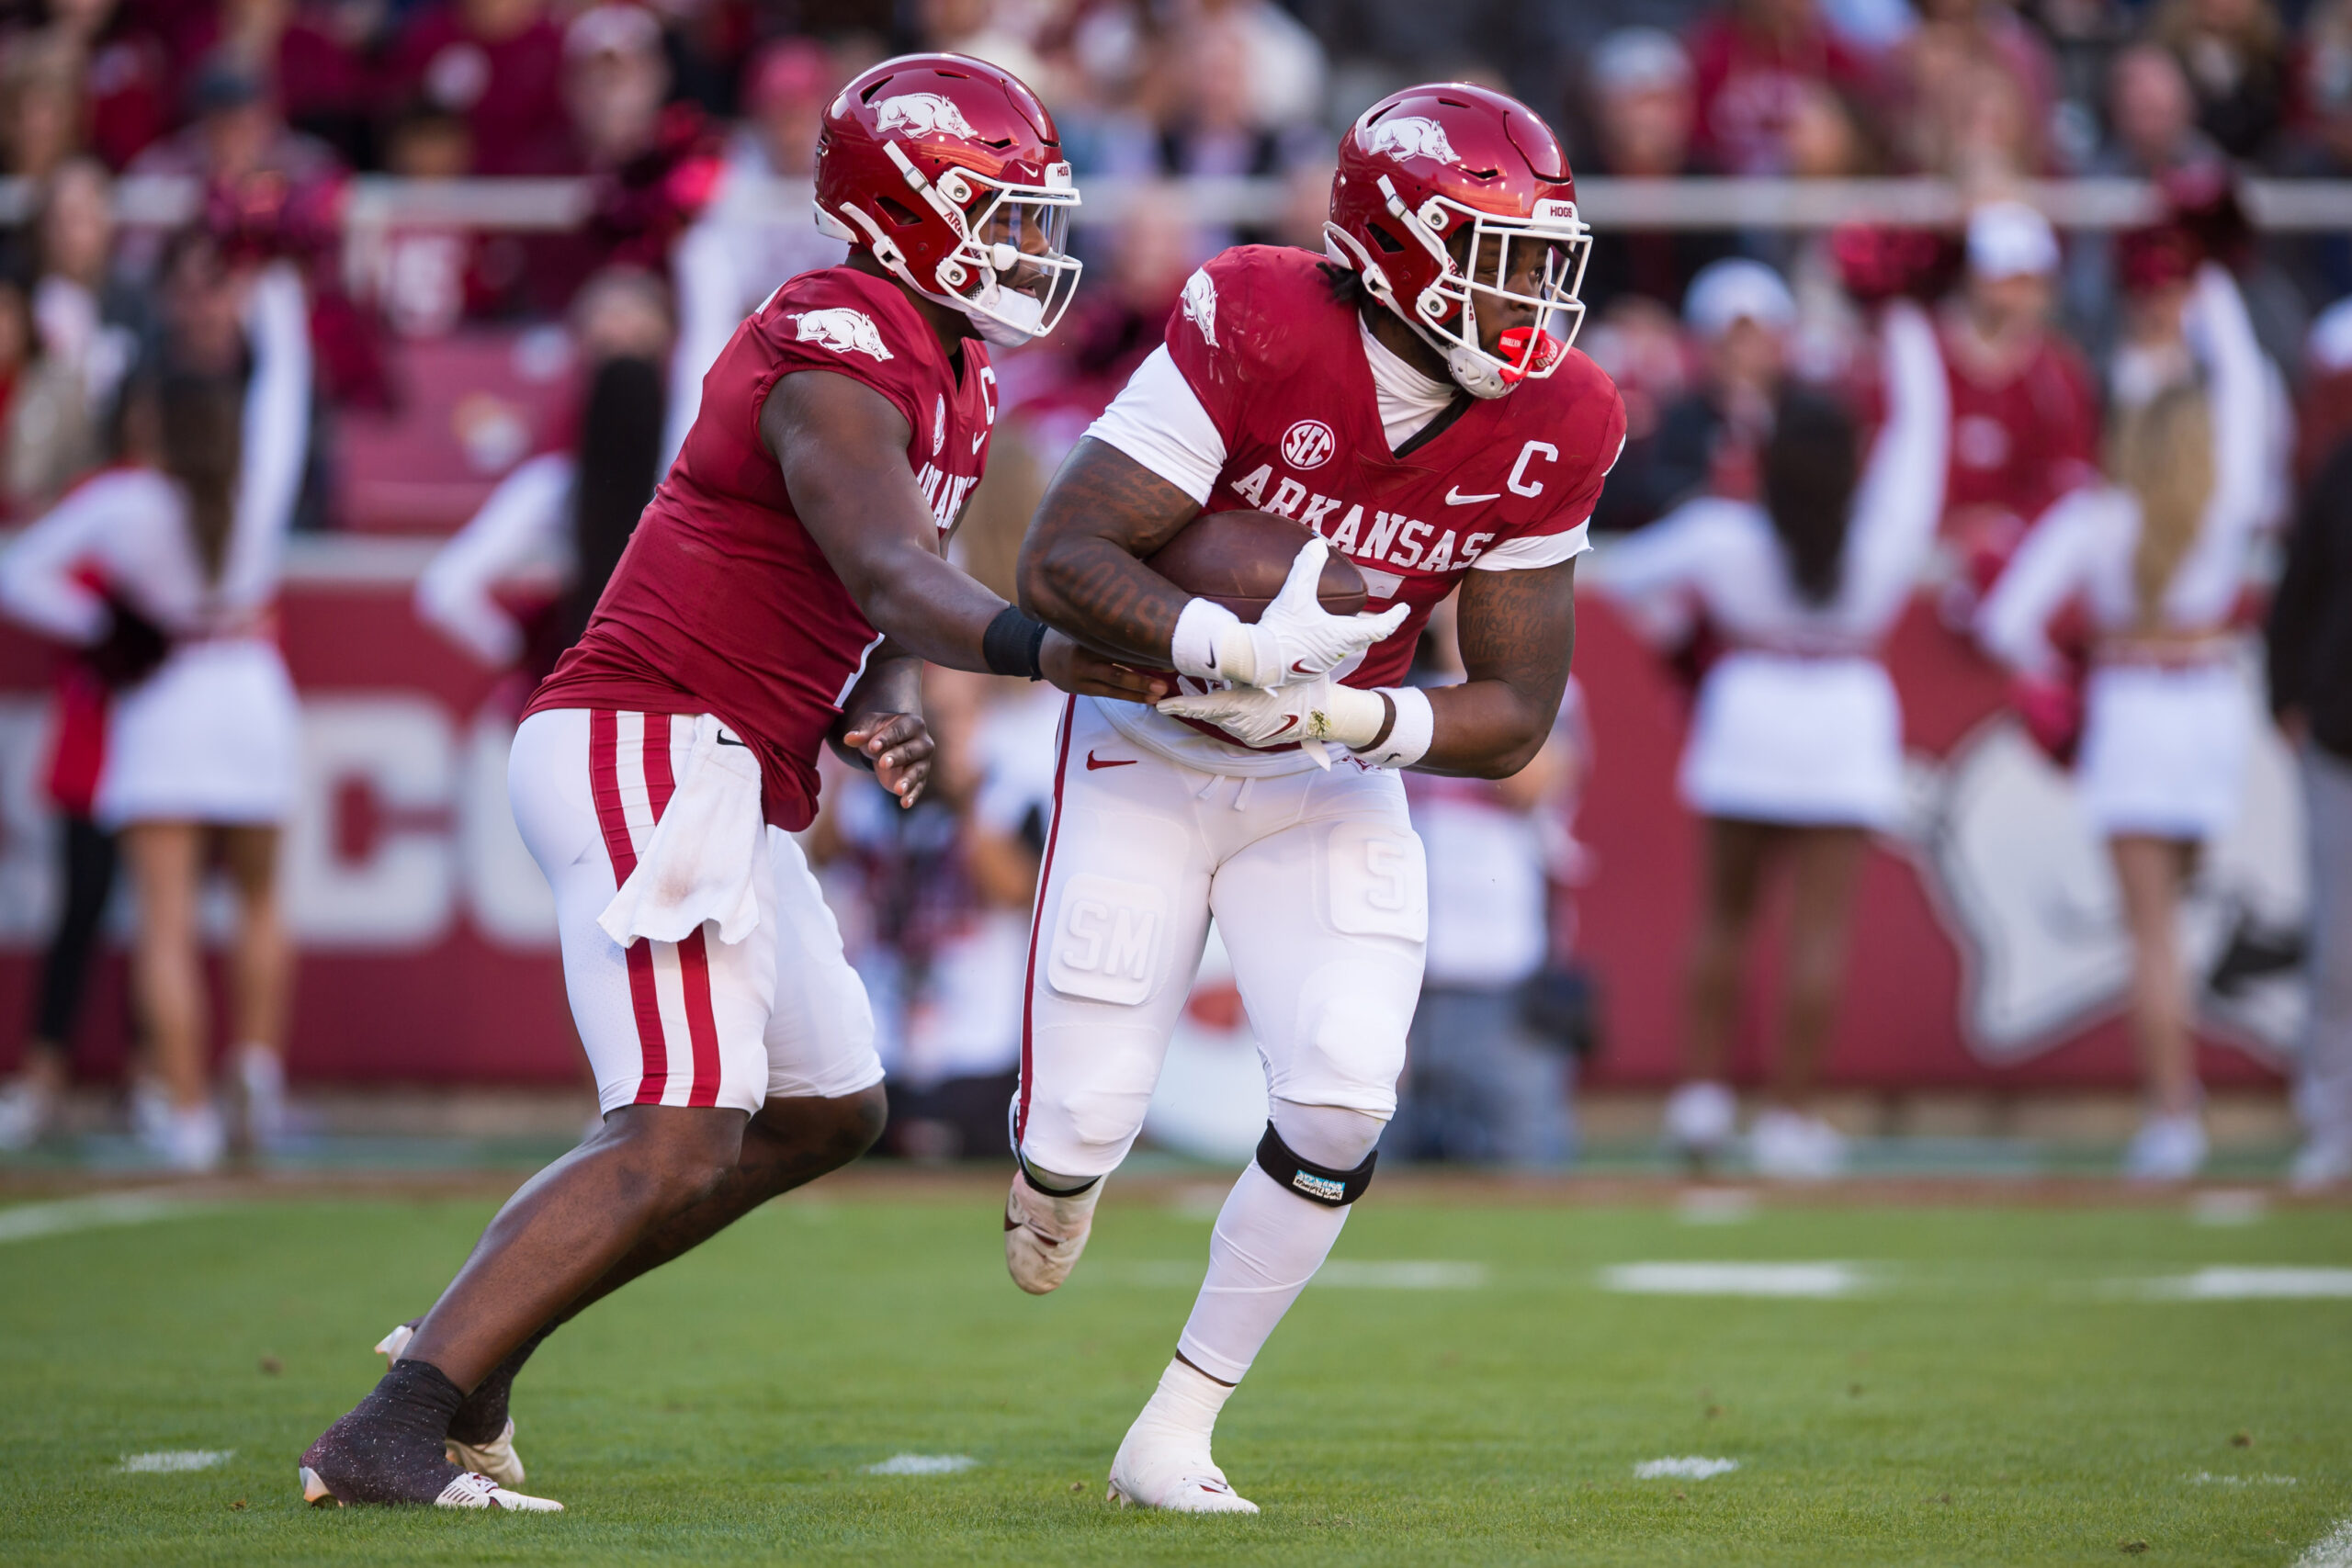 Arkansas was expected to go 8-4, but ultimately ended up 4-8, including a loss to BYU Football